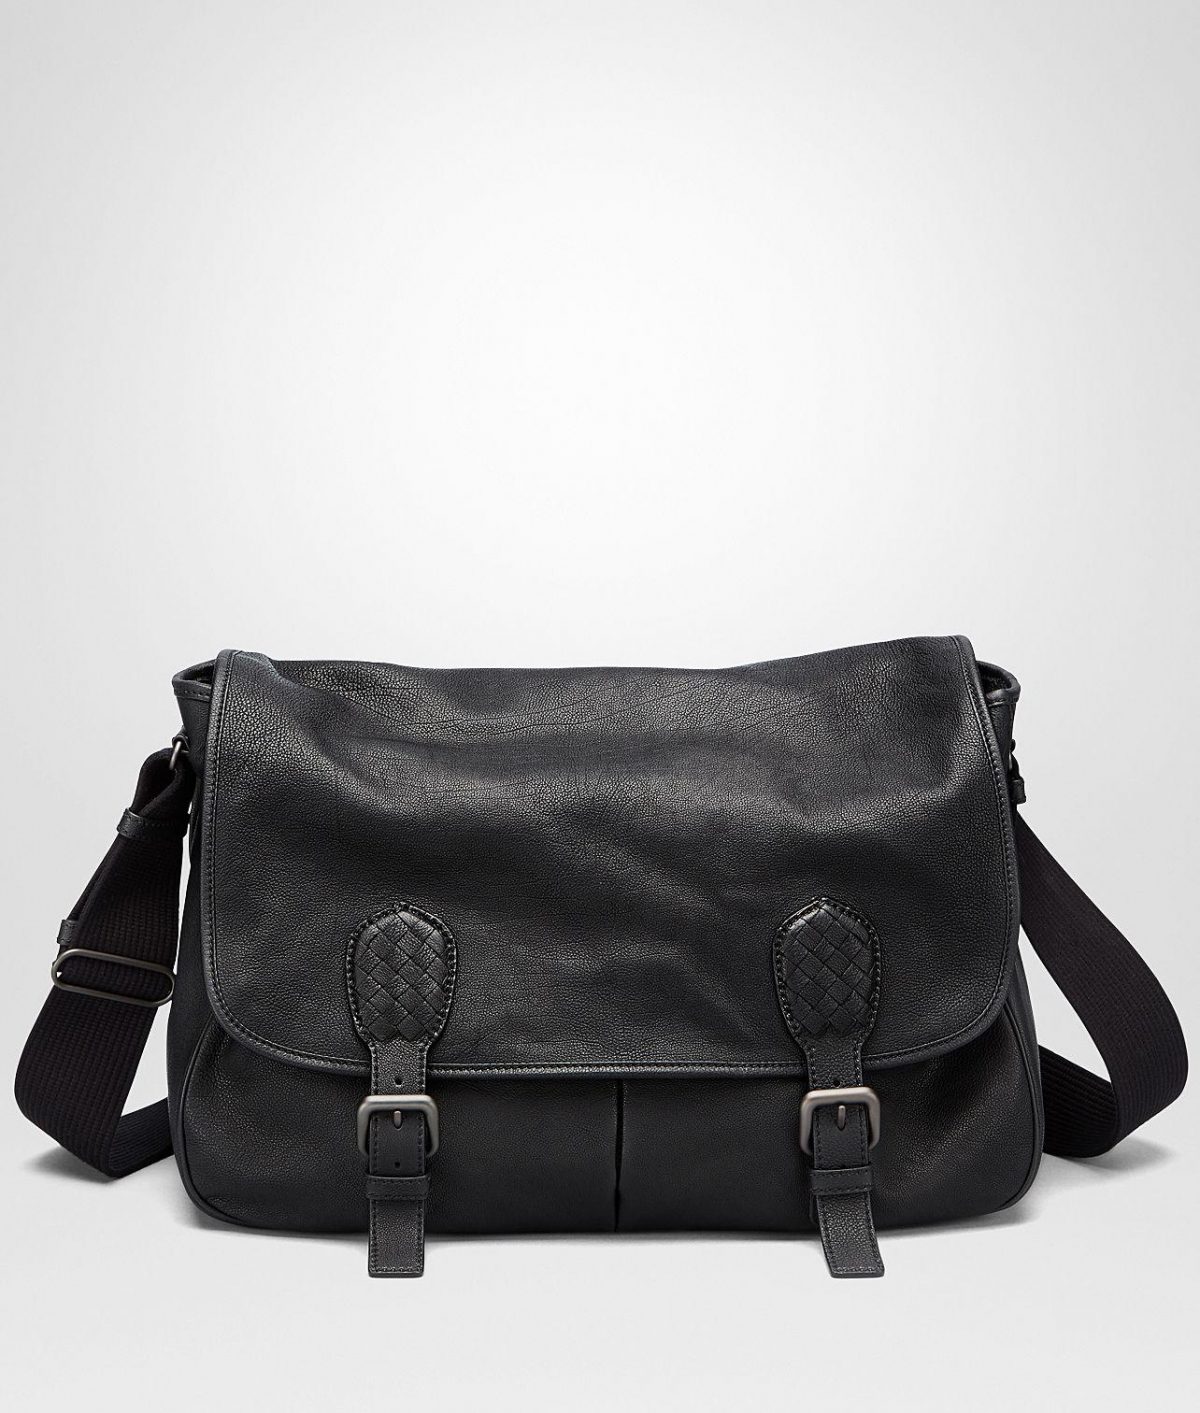 5 of the best: Black bags | Esquire Middle East – The Region’s Best Men ...